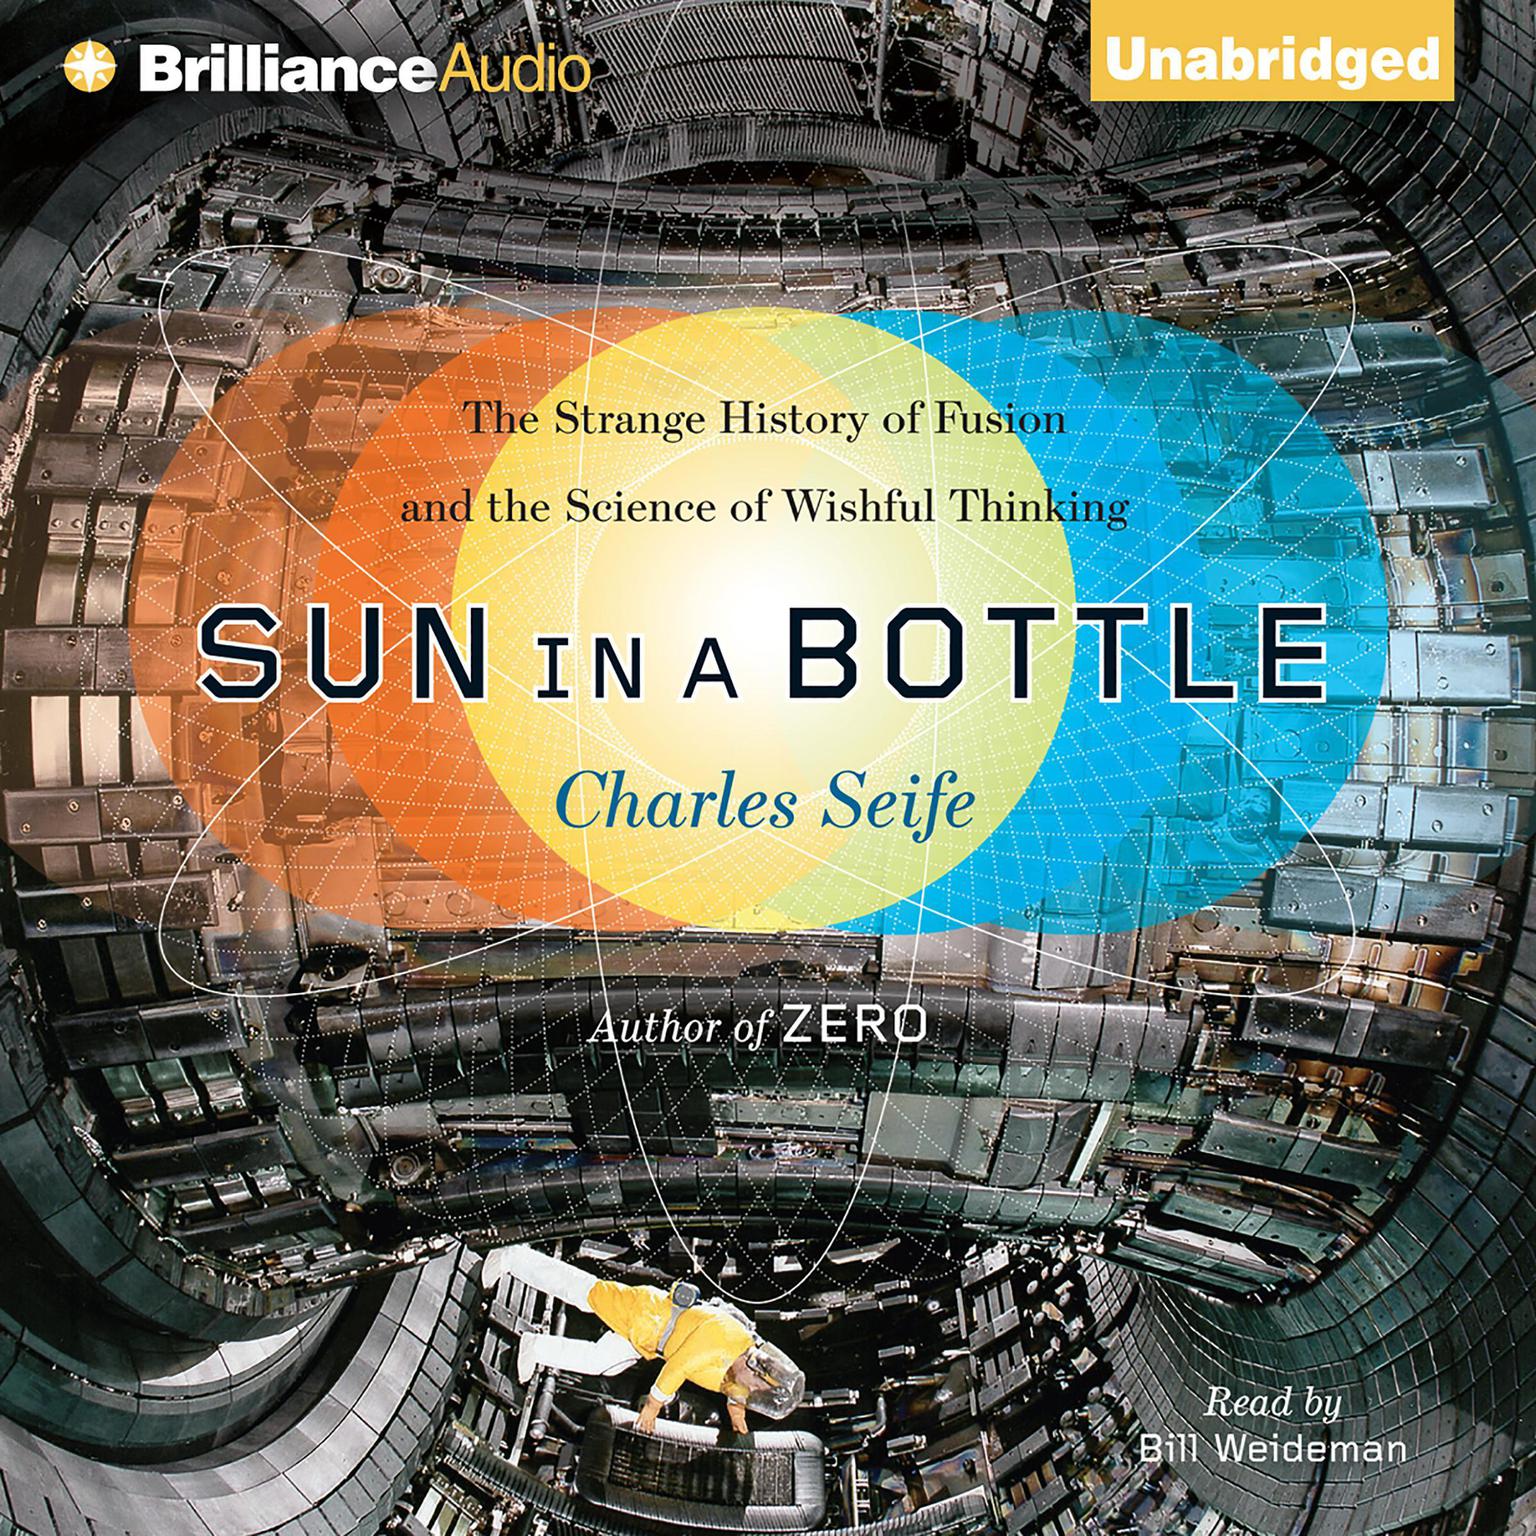 Sun in a Bottle: The Strange History of Fusion and the Science of Wishful Thinking Audiobook, by Charles Seife